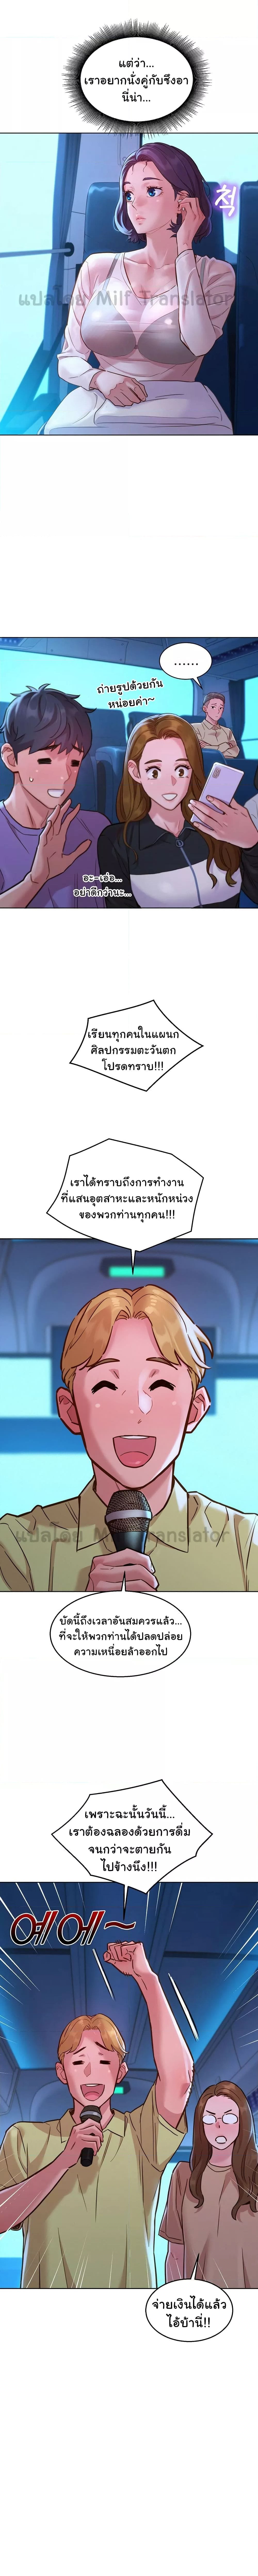 Let’s Hang Out from Today ตอนที่ 32 ภาพ 10